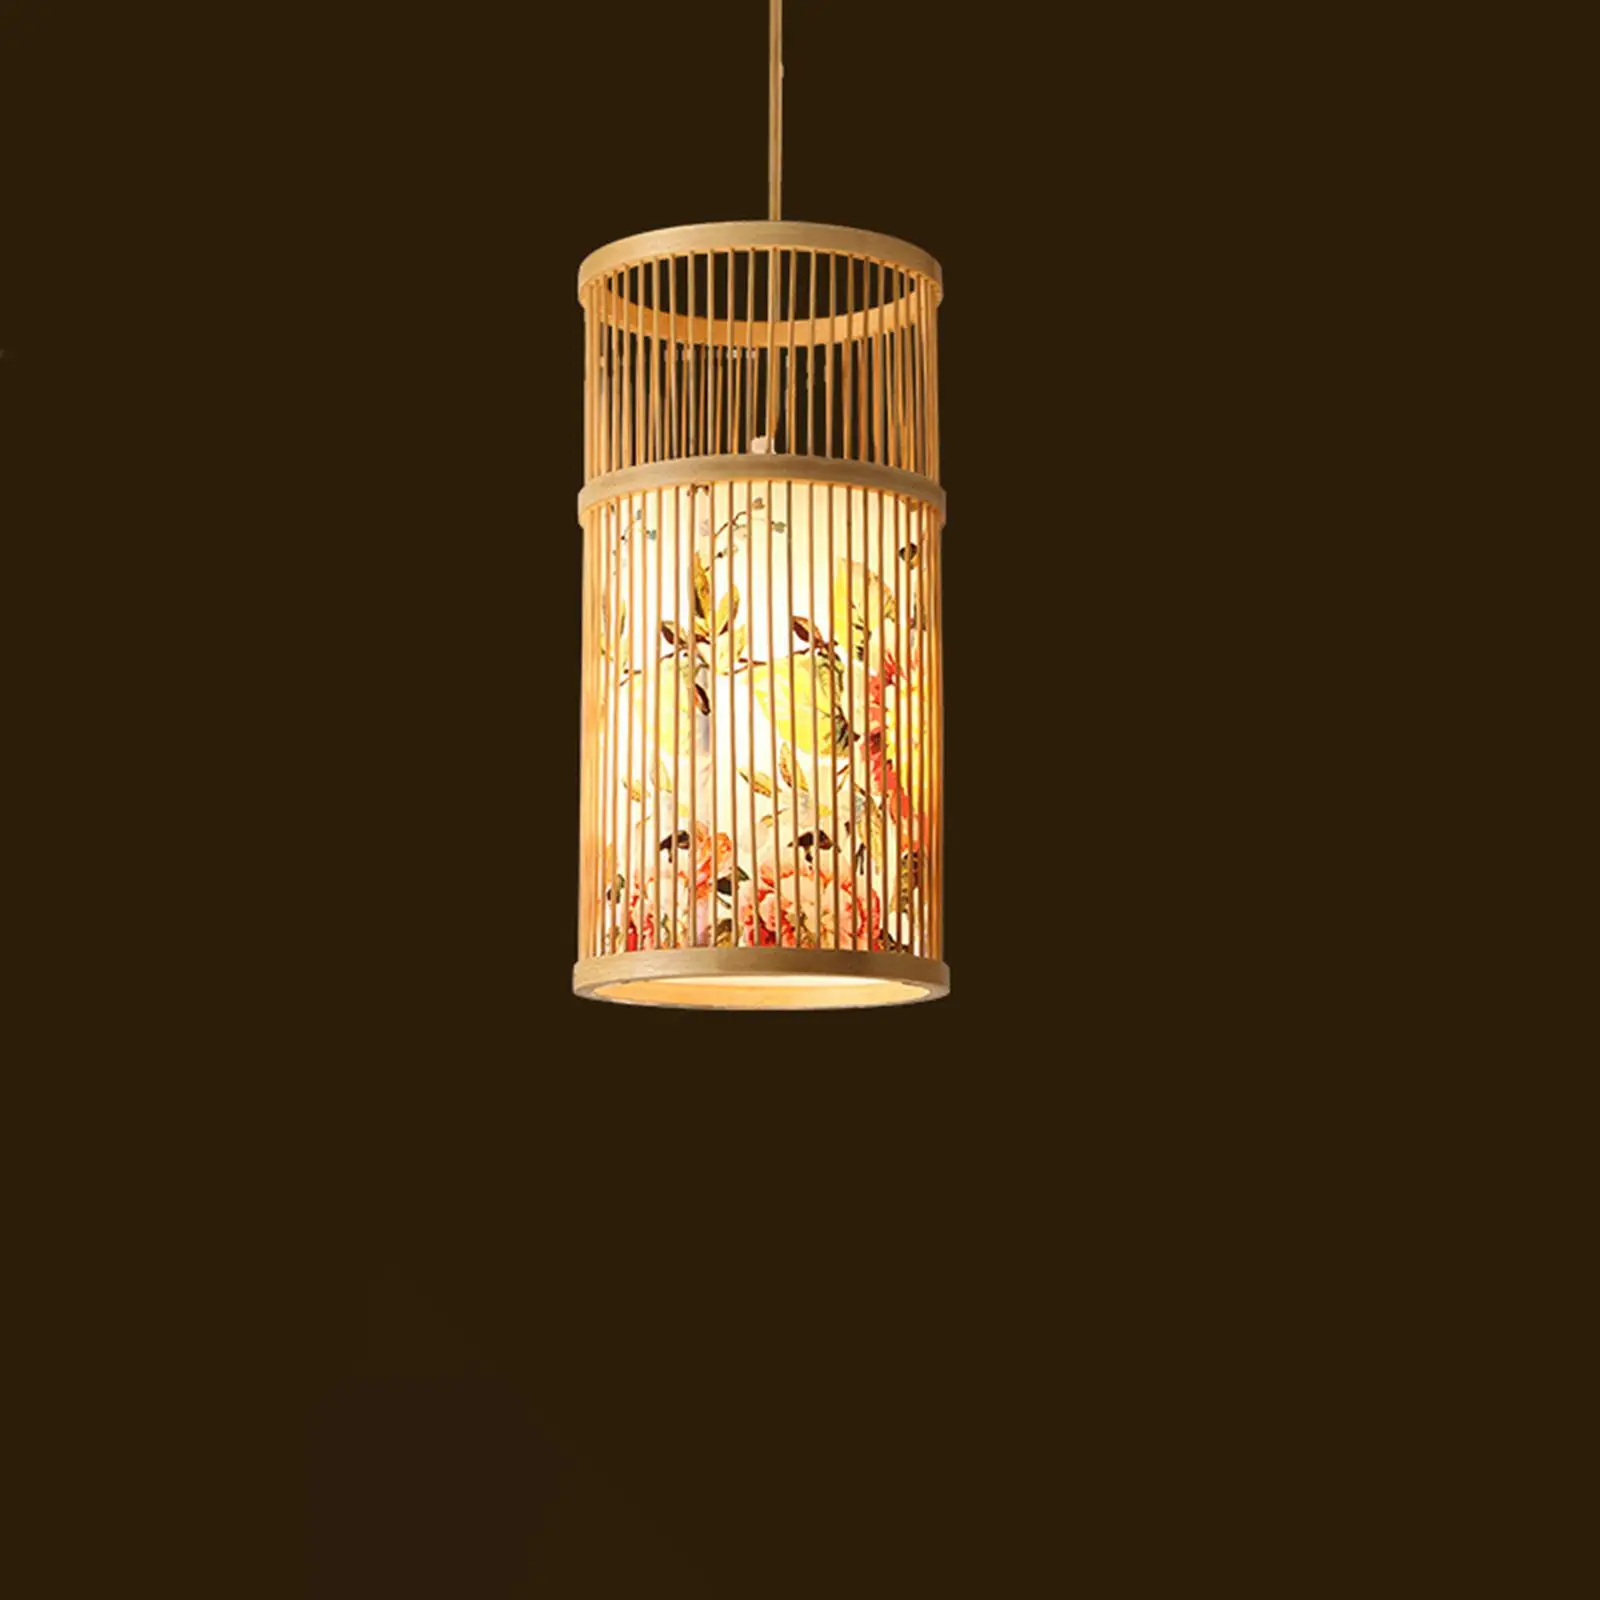 Boho Chandelier Light Fixture Bamboo Woven Lampshade Ceiling Light Cover for Livingroom Cafes Kitchens Island Hotel Teahouse